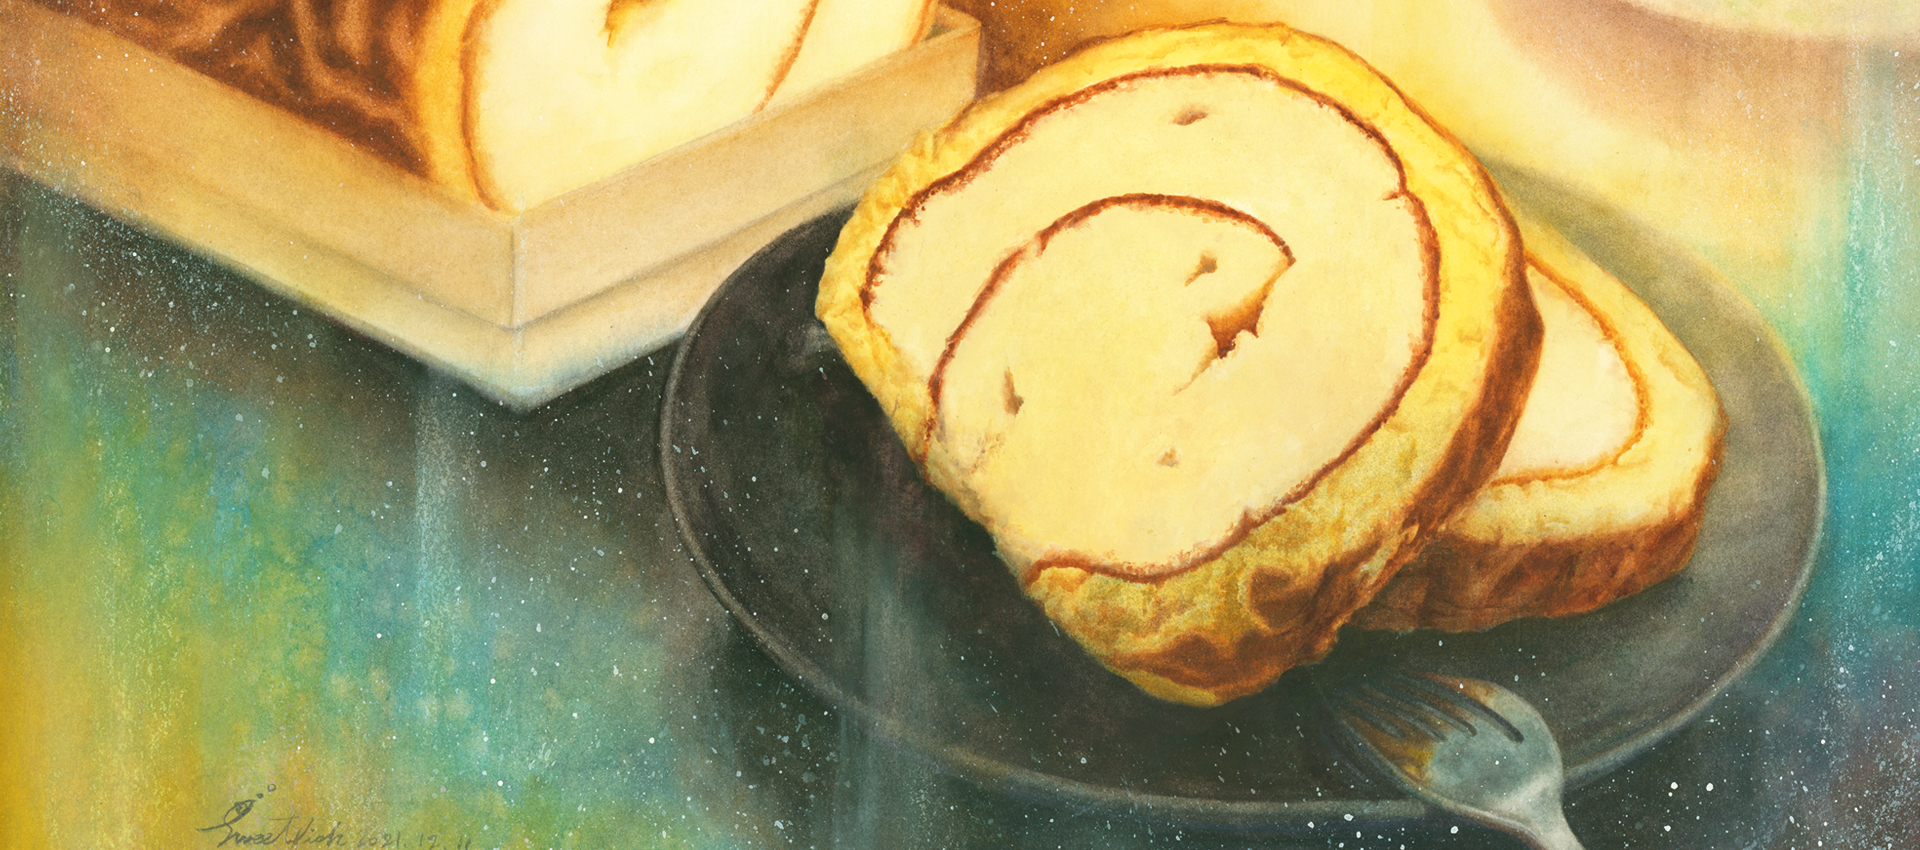 tiger-skin-cake-roll-food-watercolor-painting-by-sweetfish-food-art